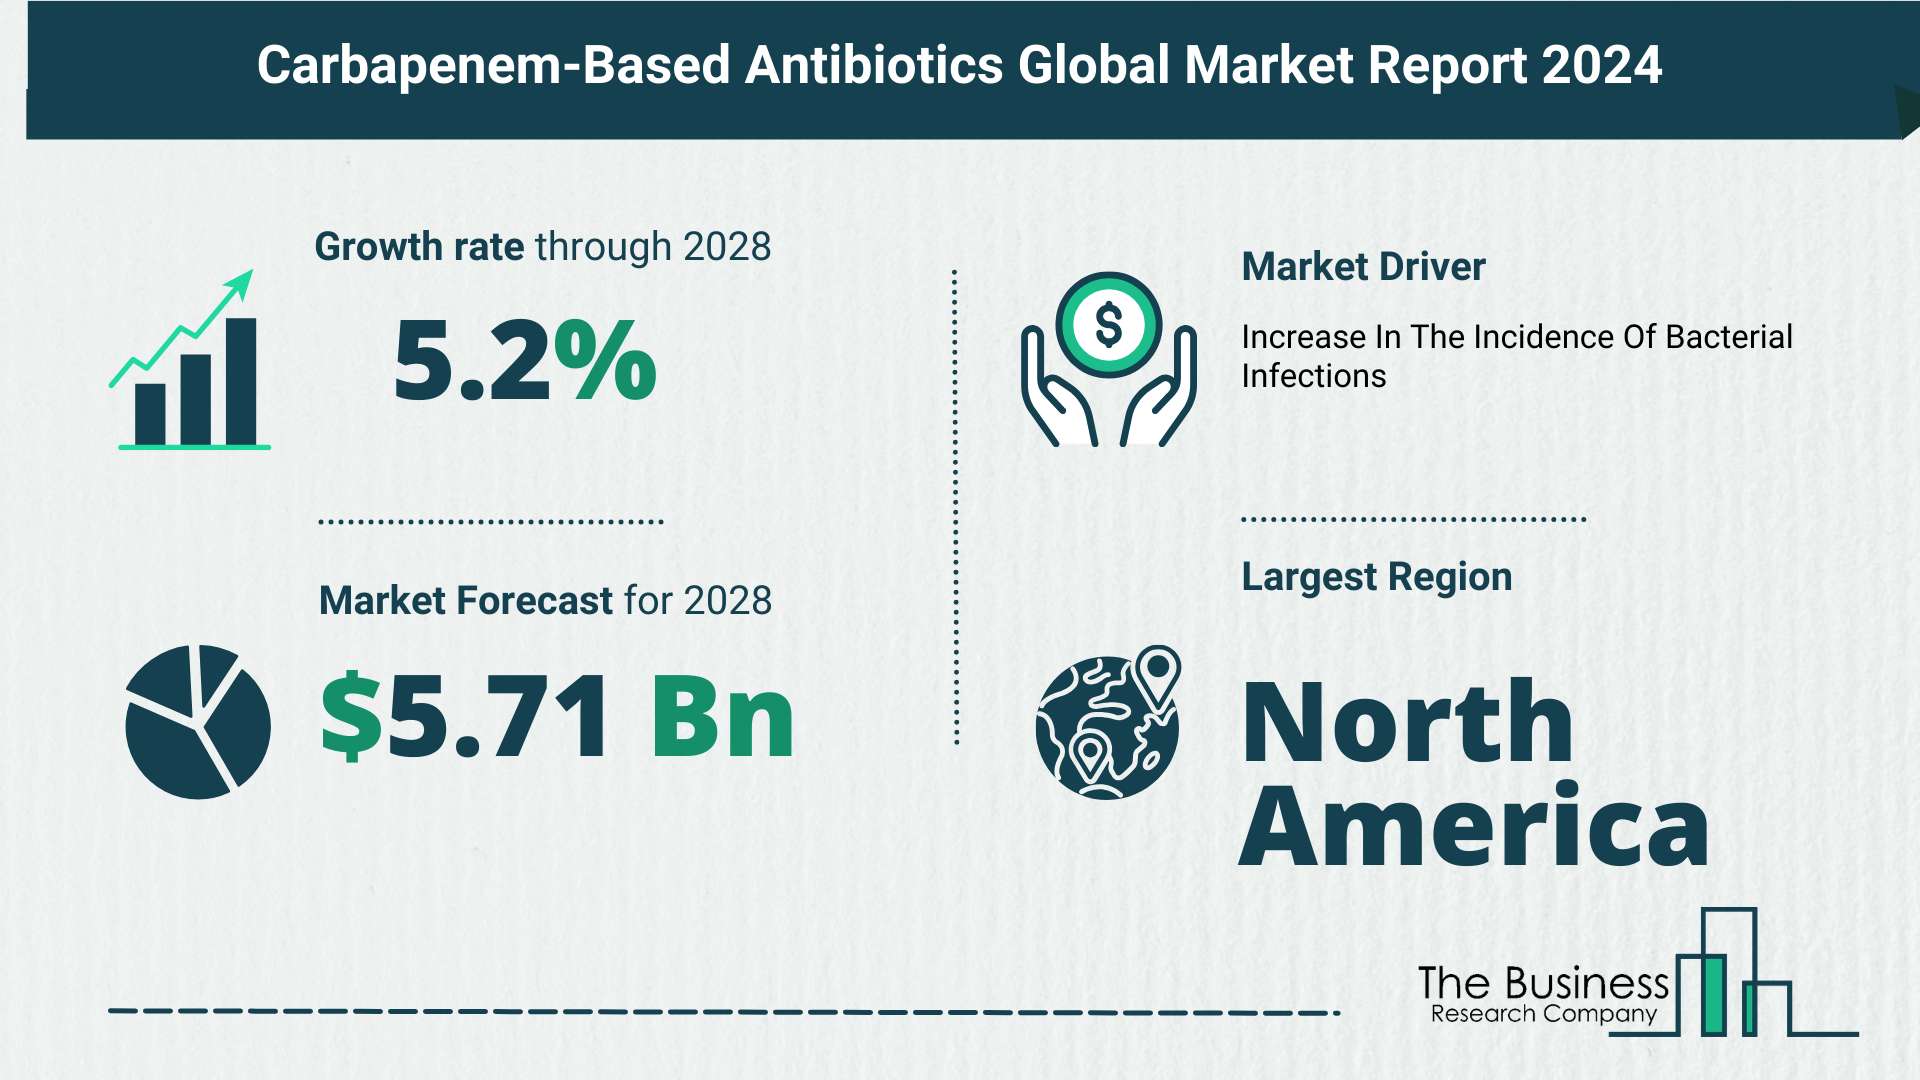 Overview Of The Carbapenem-Based Antibiotics Market 2024: Size, Drivers, And Trends